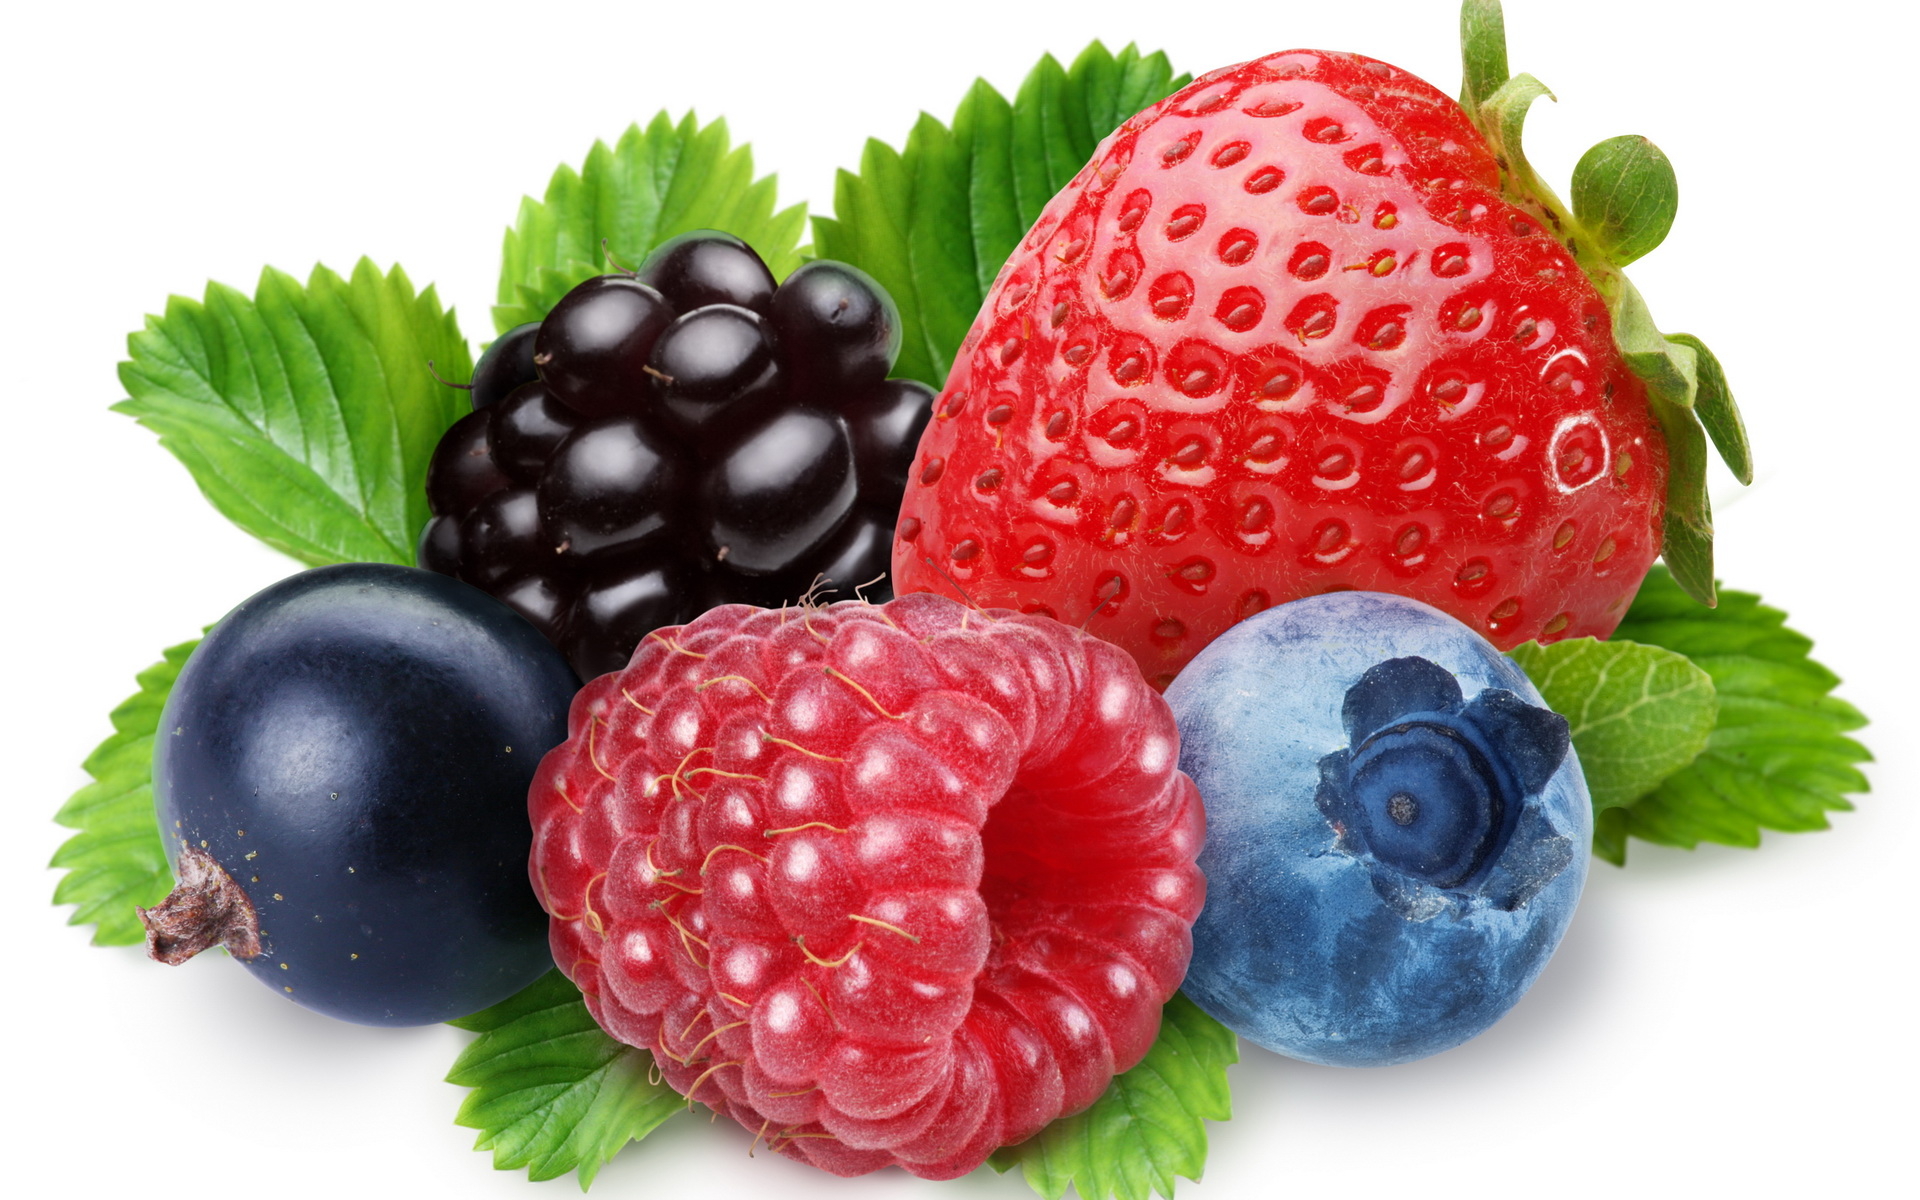 Juicy Berries Wallpaper And Image Pictures Photos